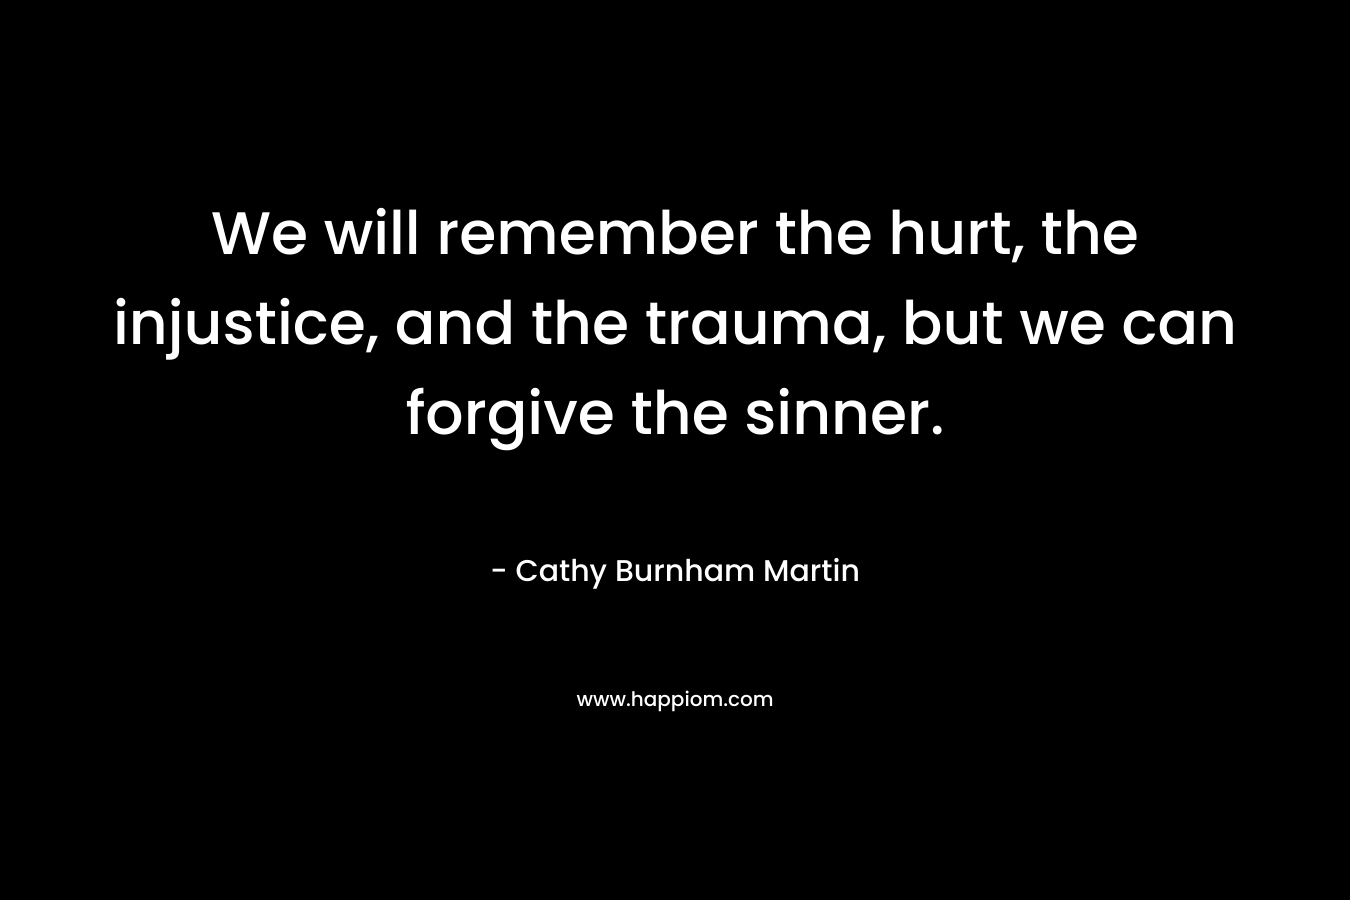 We will remember the hurt, the injustice, and the trauma, but we can forgive the sinner.